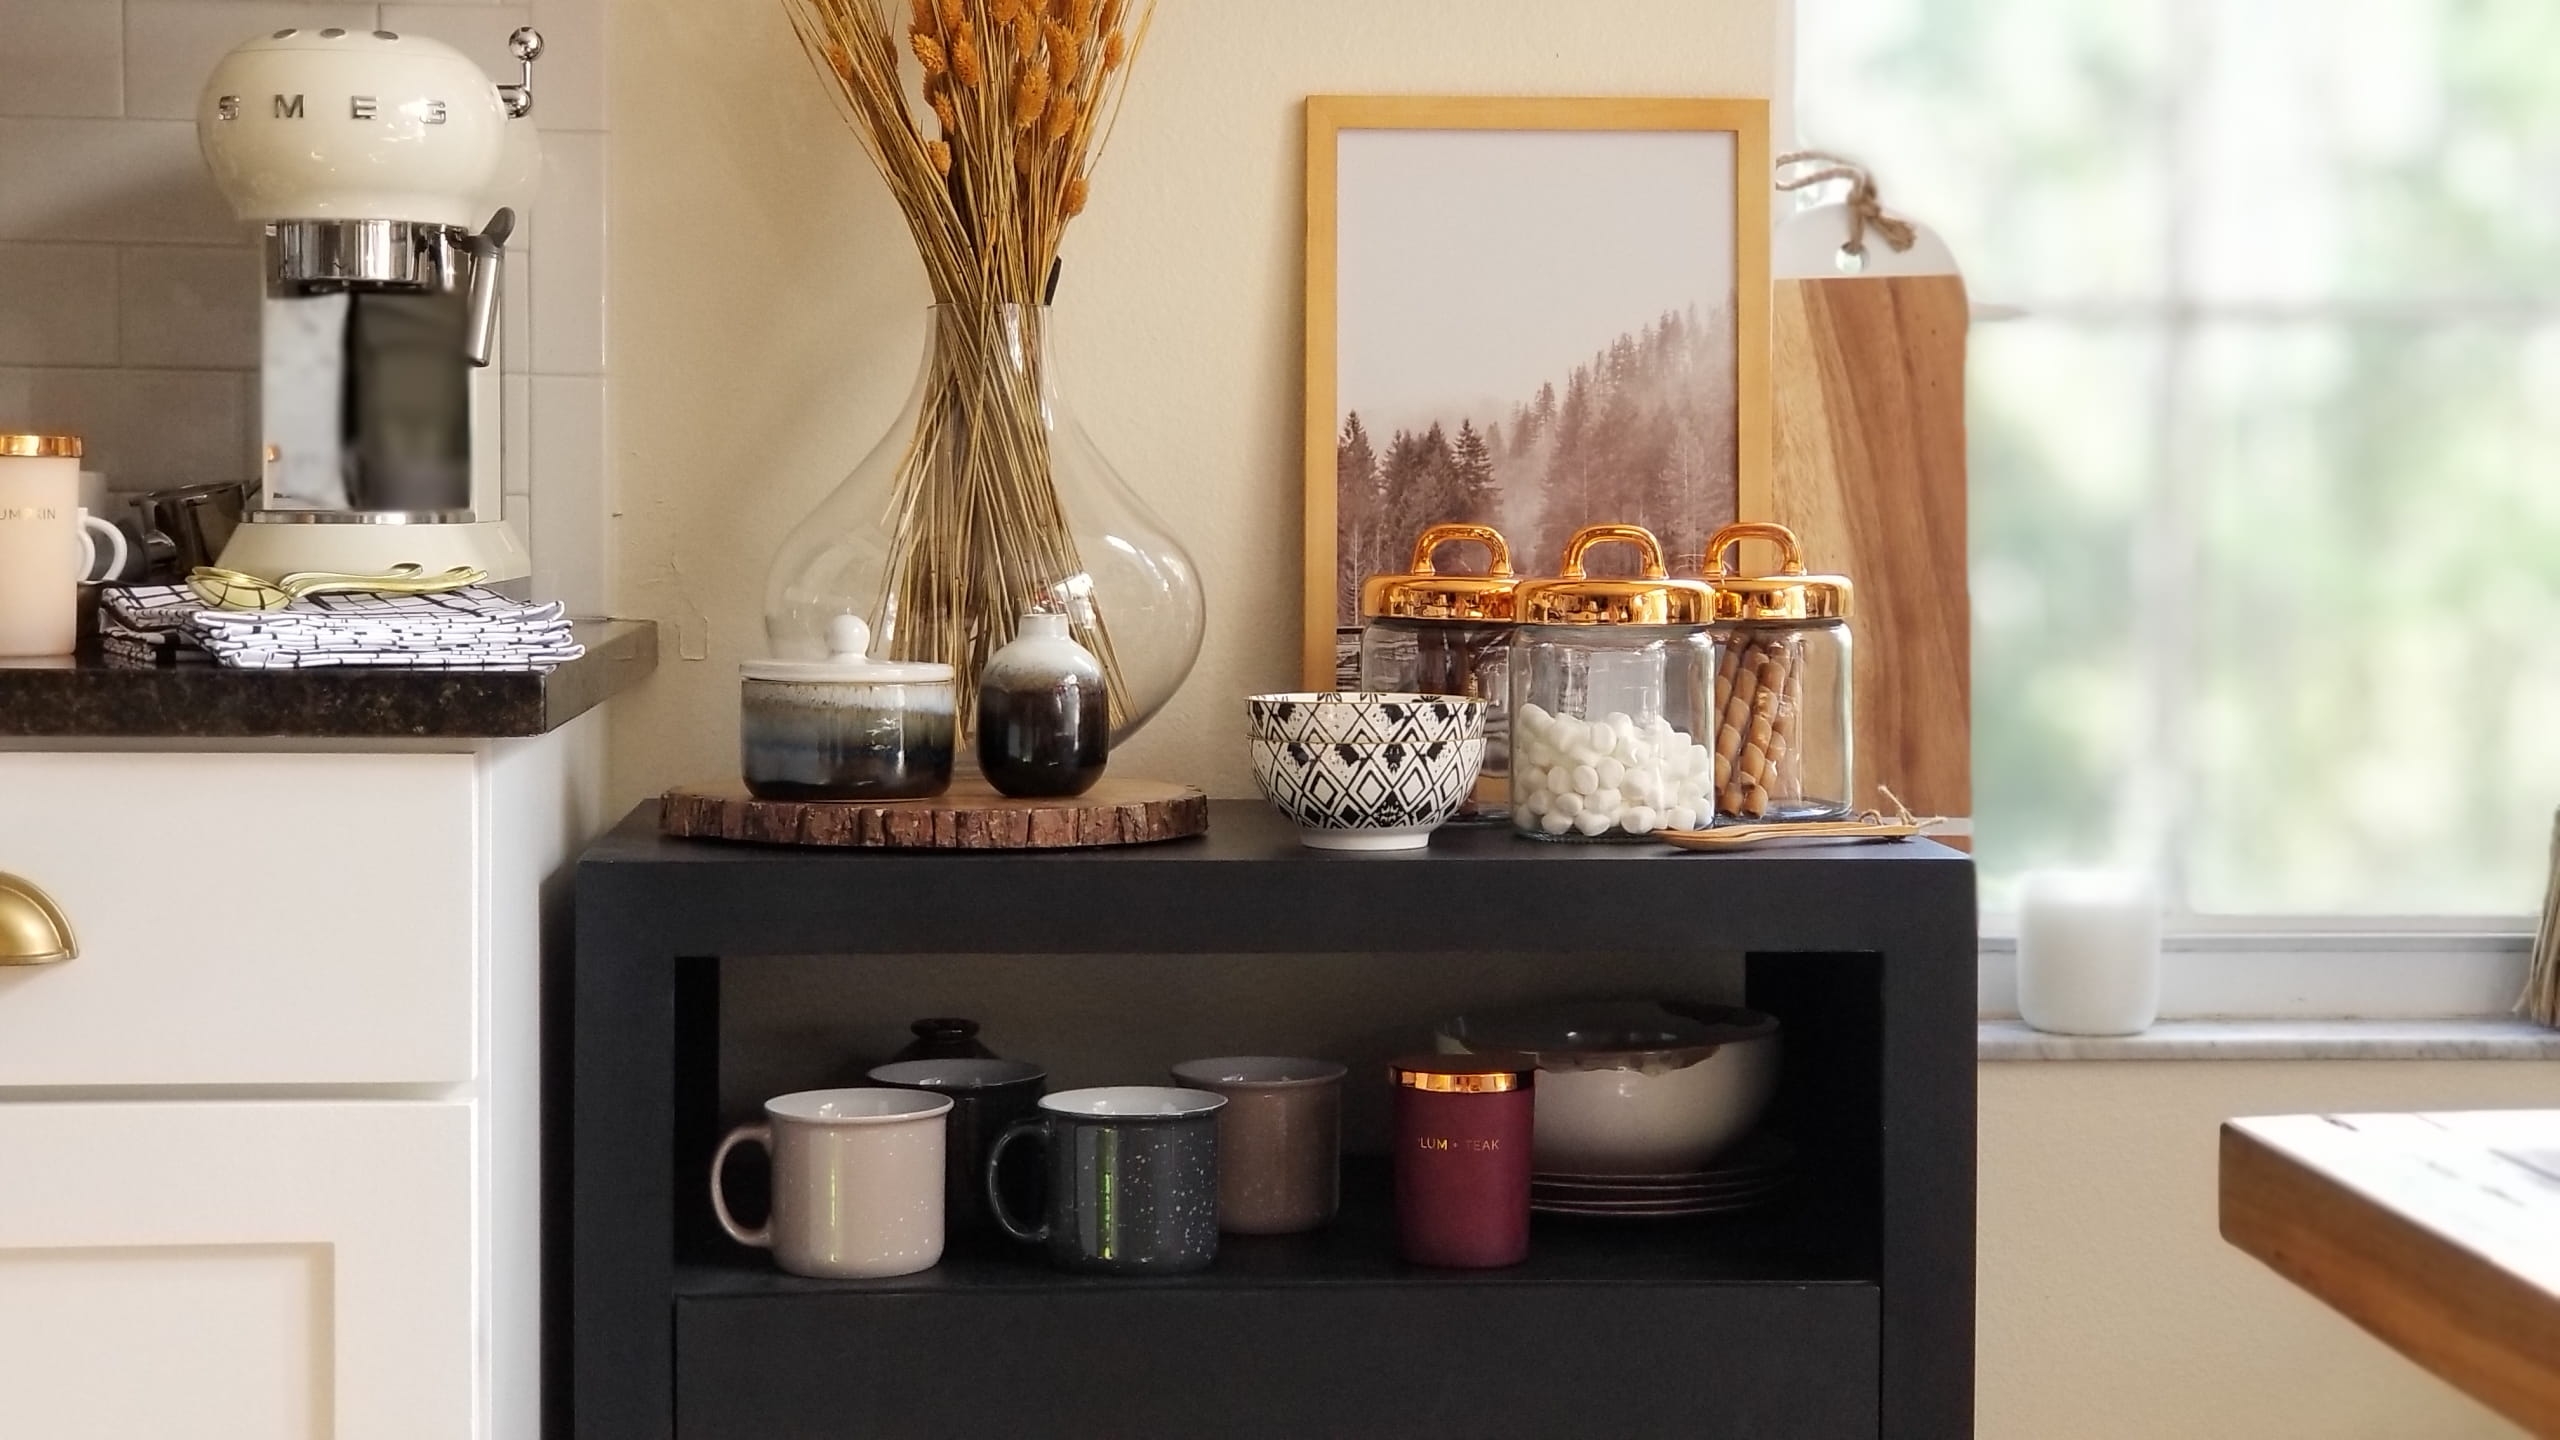 At Home Coffee Bar Kitchen Decor Fall Decorating black and white rustic industrial cozy minimalist modern anthropologie style marquee light copper dried flowers pottery ideas hot chocolate tea smores